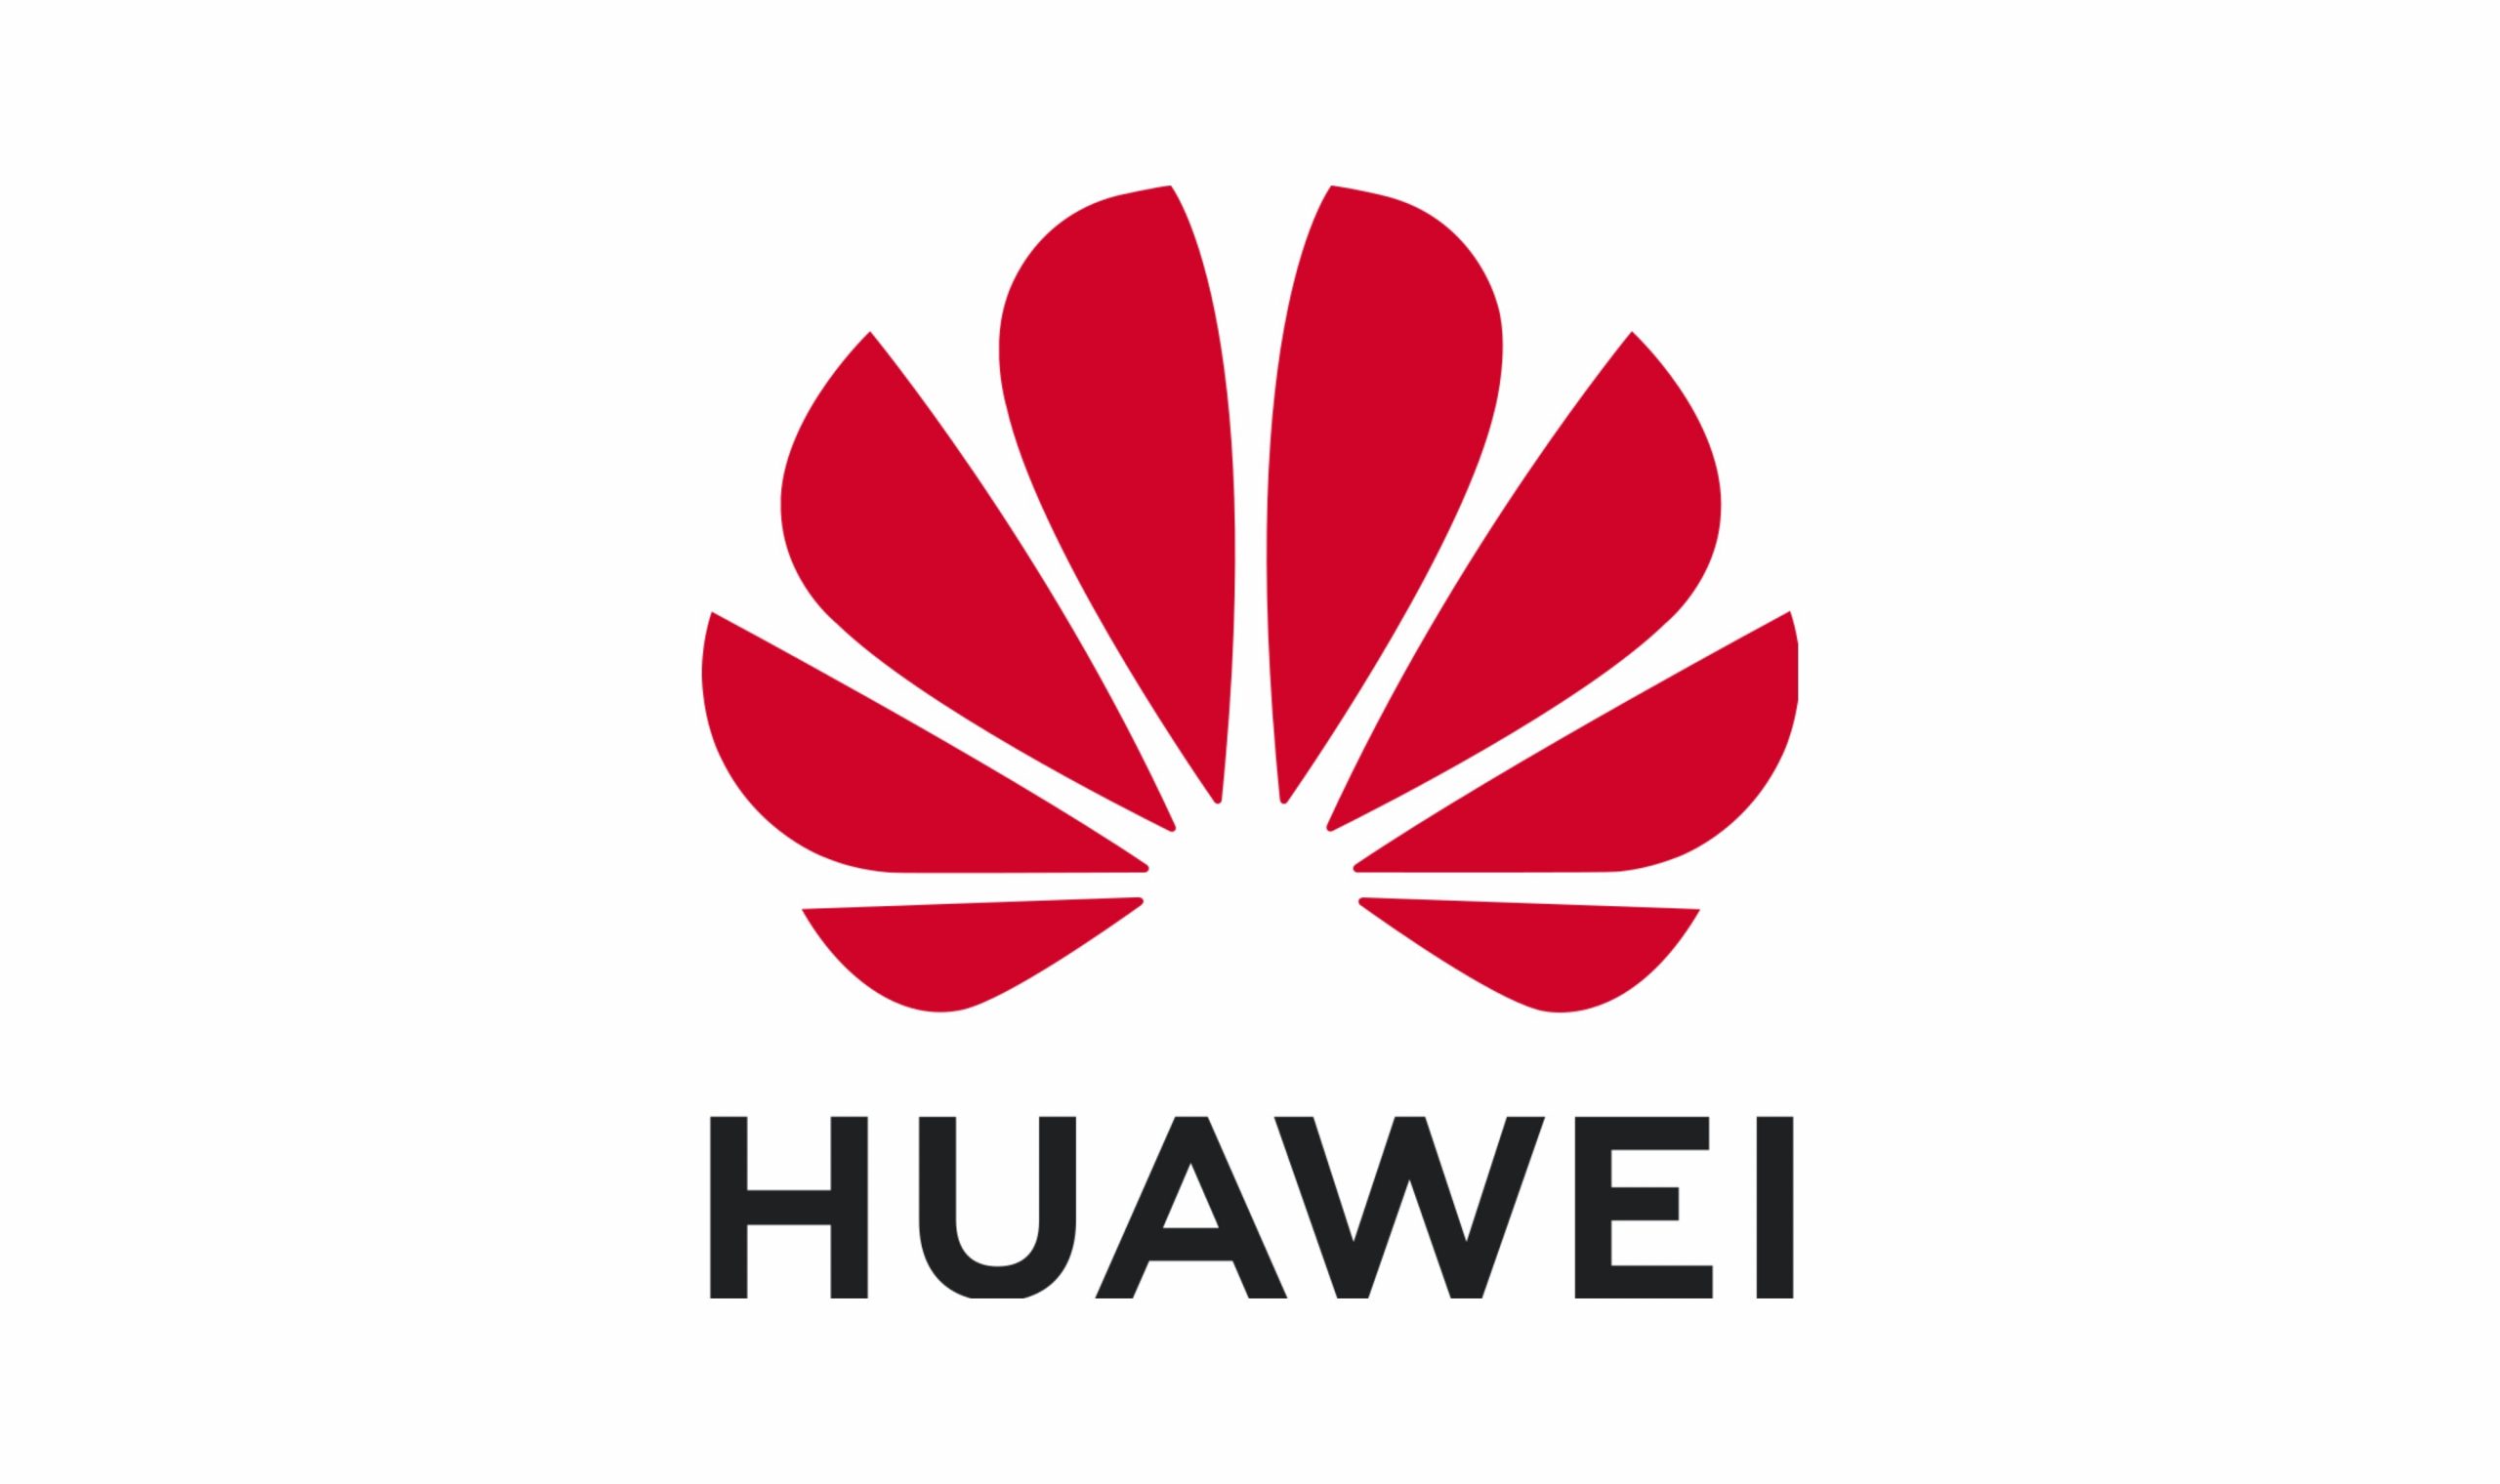 HUAWEI 12000 66W SuperCharge Power Bank gets certified by 3C